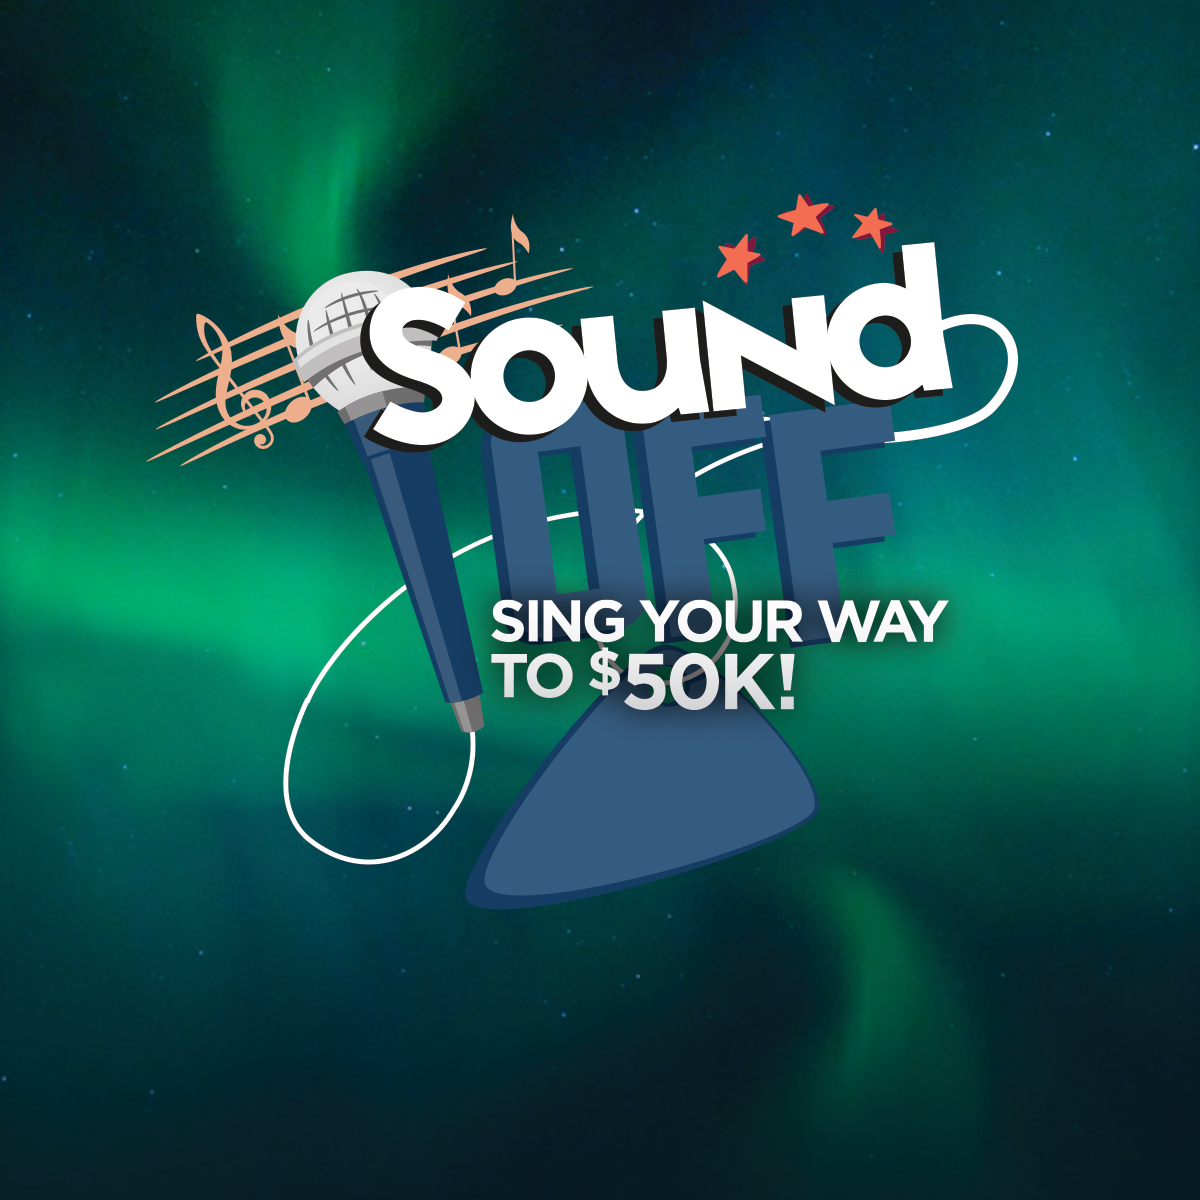 Cumulus Broadcasting To Give Away $50,000 For Singing Contest